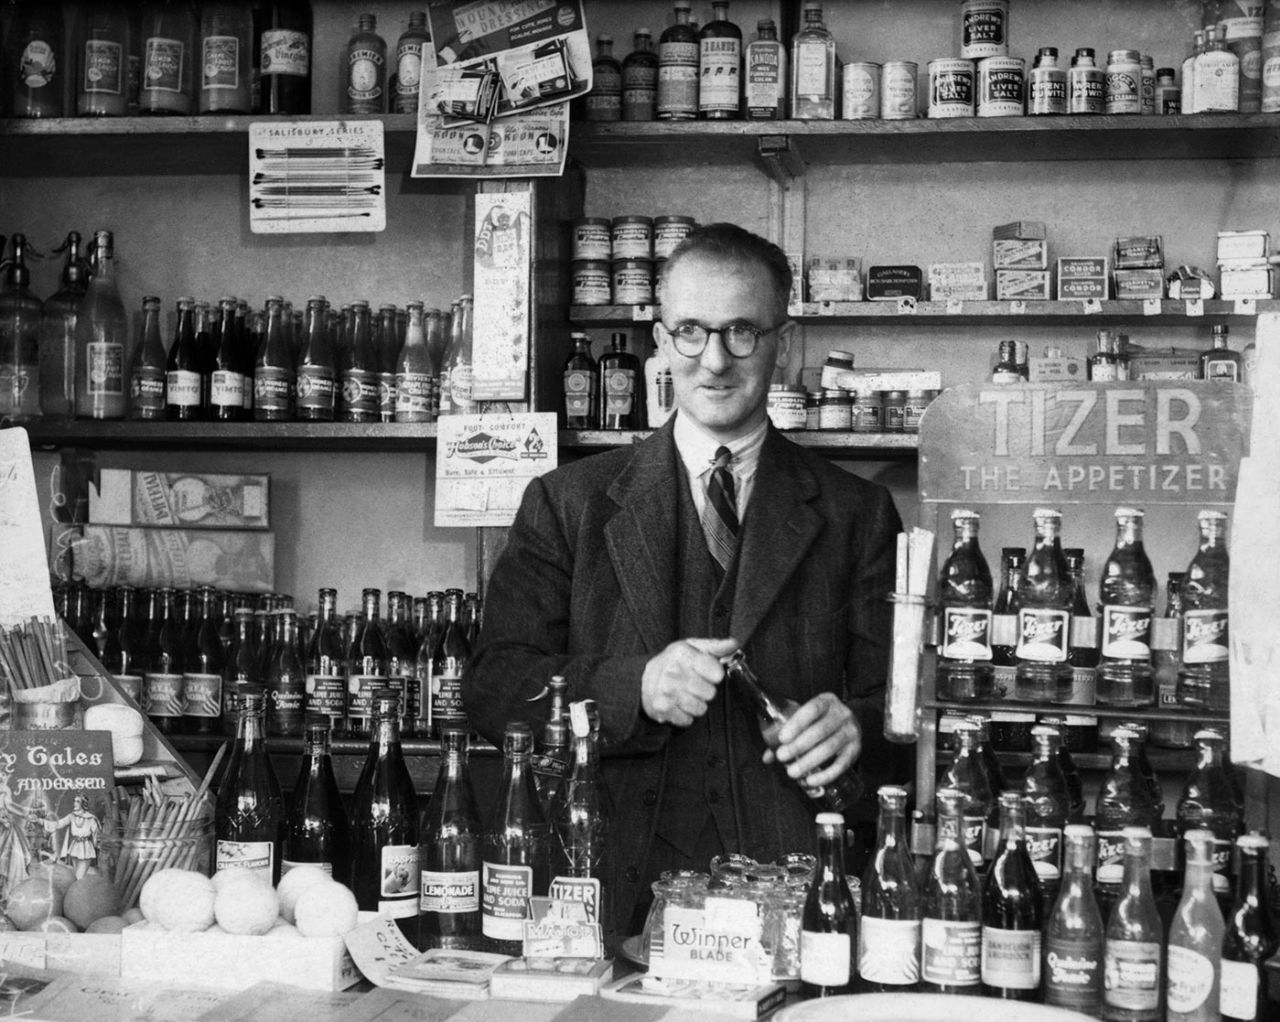 Harold Larwood behind the counter of his sweet shop in Caunce Street, Blackpool, England, August 2, 1949